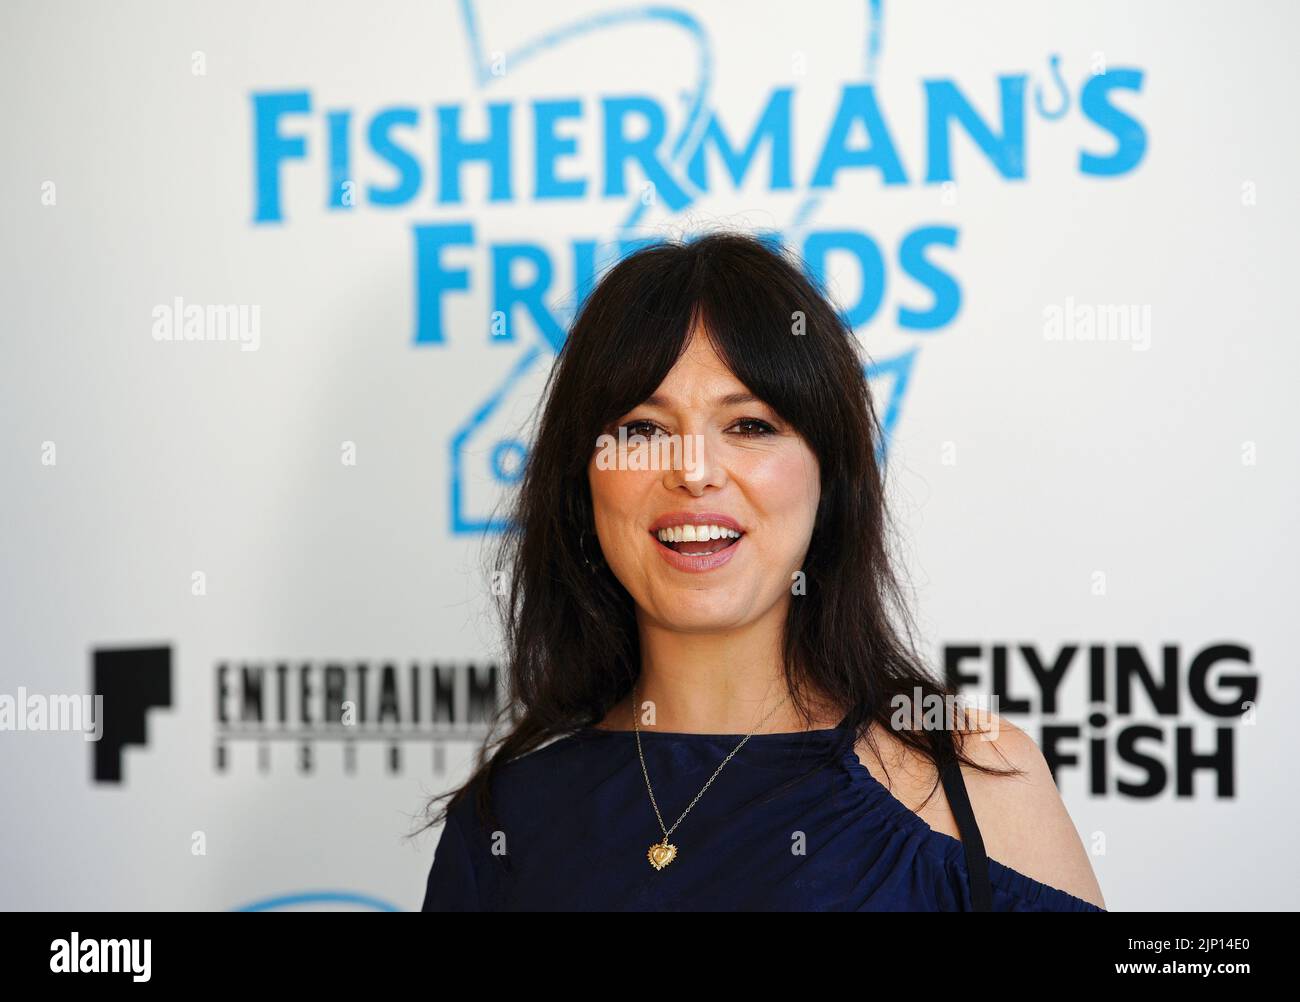 File photo dated 09/08/22 of Imelda May attending the UK premiere of Fishermen's Friends: One and All, at the Lighthouse Cinema, Newquay, Cornwall, as Ms May has said filming the Fisherman's Friends sequel was an 'eye-opener' regarding the impact of second homes in Cornwall, adding: 'It needs to be addressed.' Stock Photo